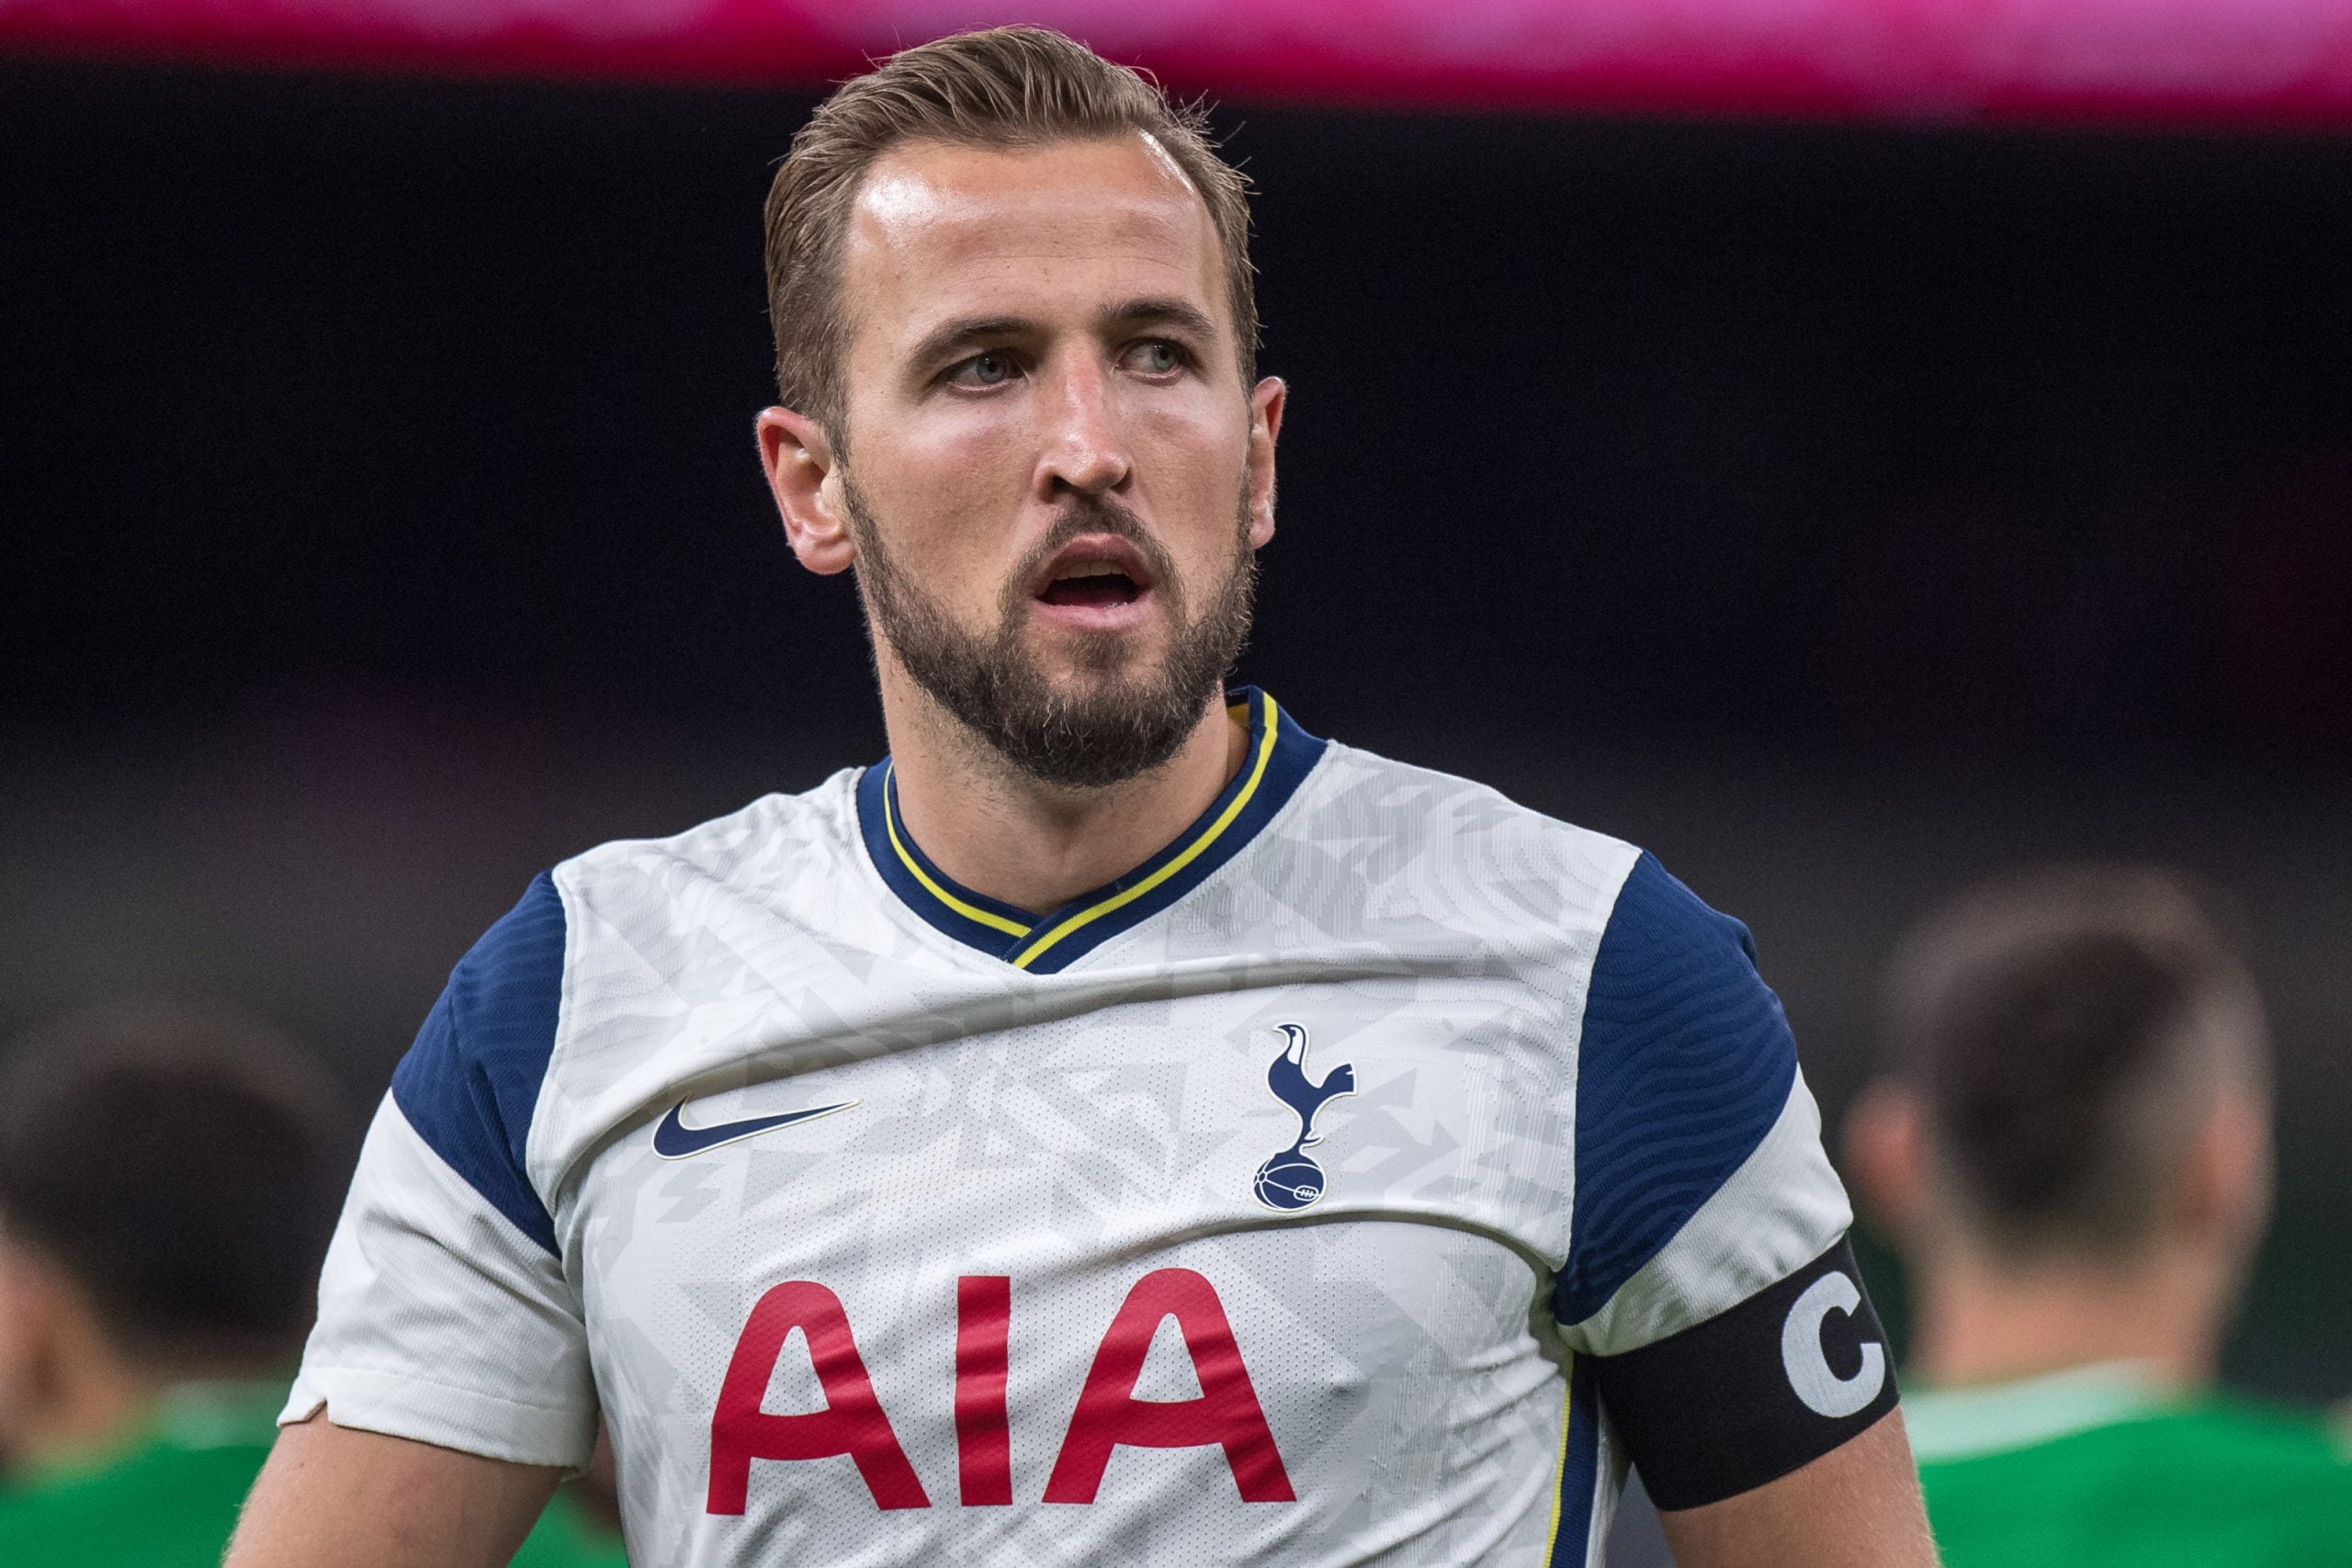 EPL: Harry Kane is gone - Neville says after Tottenham 1-0 win over Man City